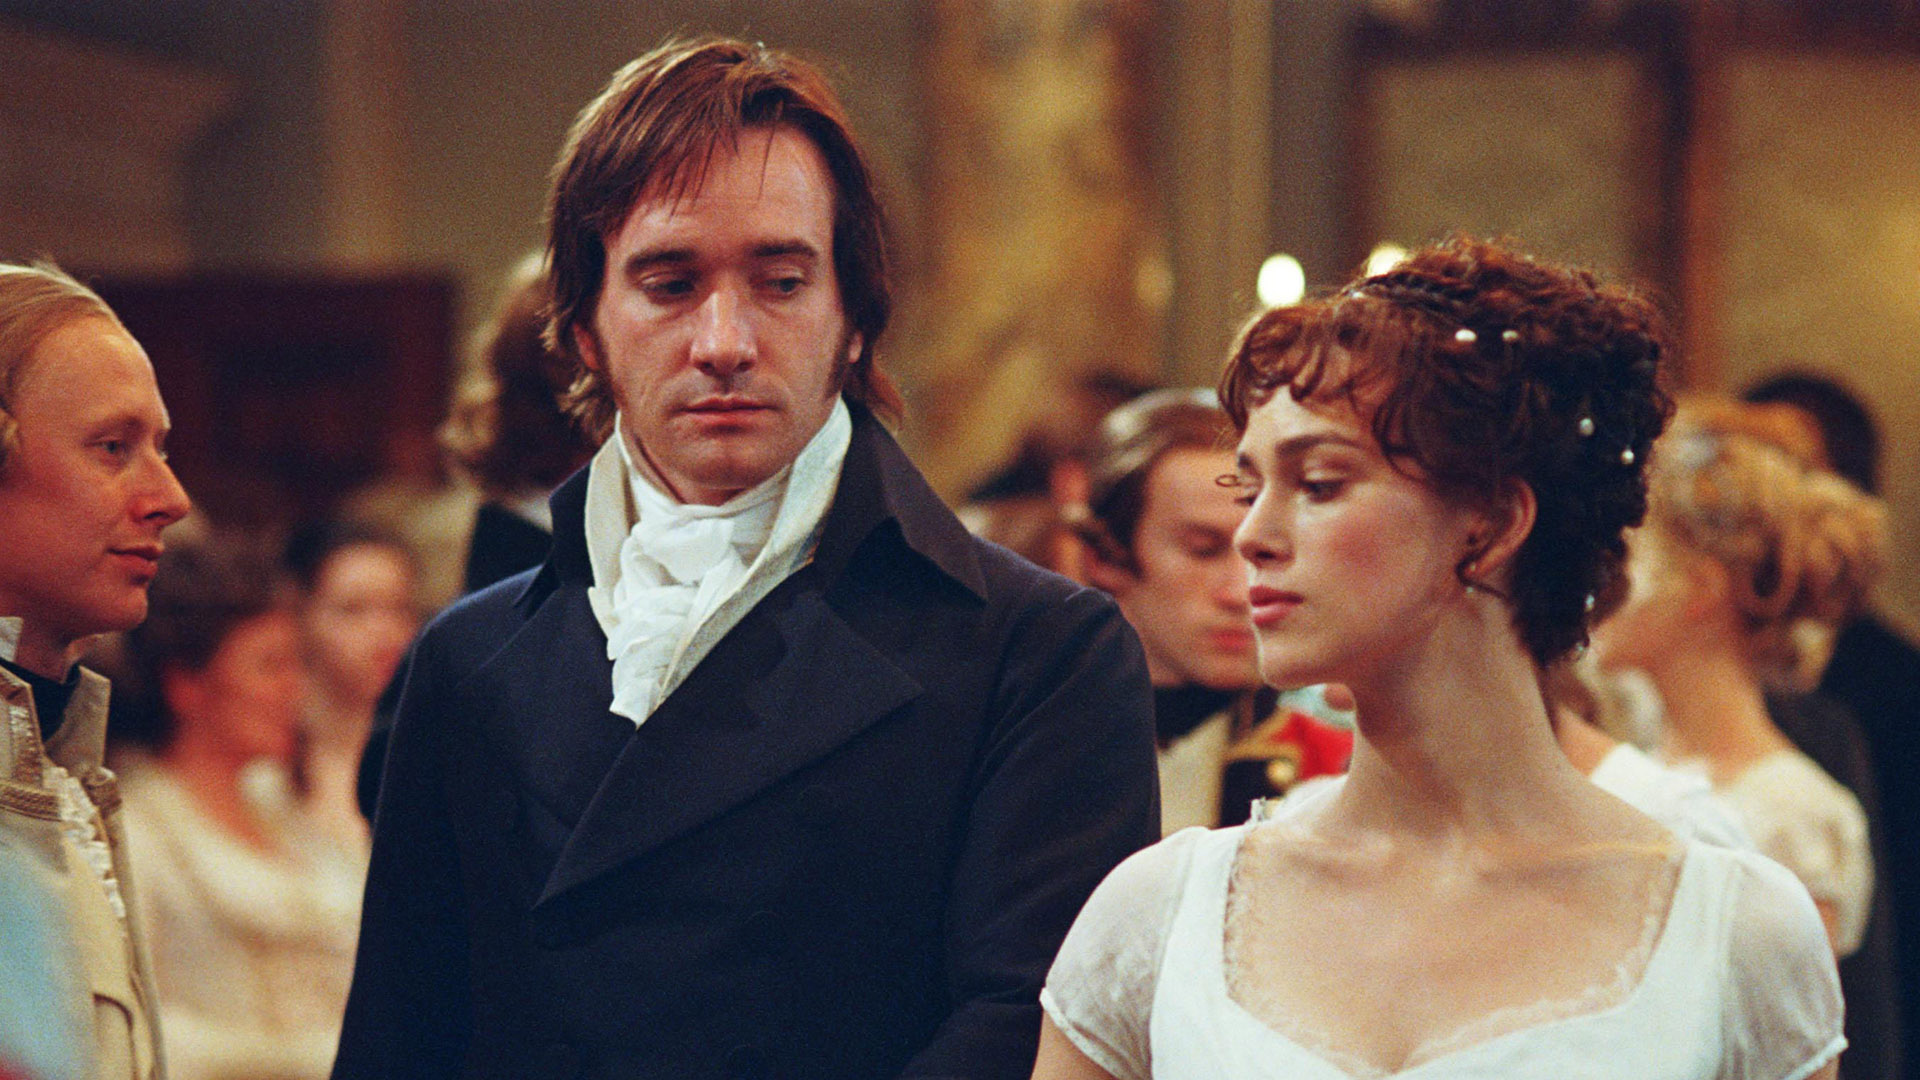 A Definitive Pride & Prejudice List: Mr. Darcys, Ranked from Hot to Hottest